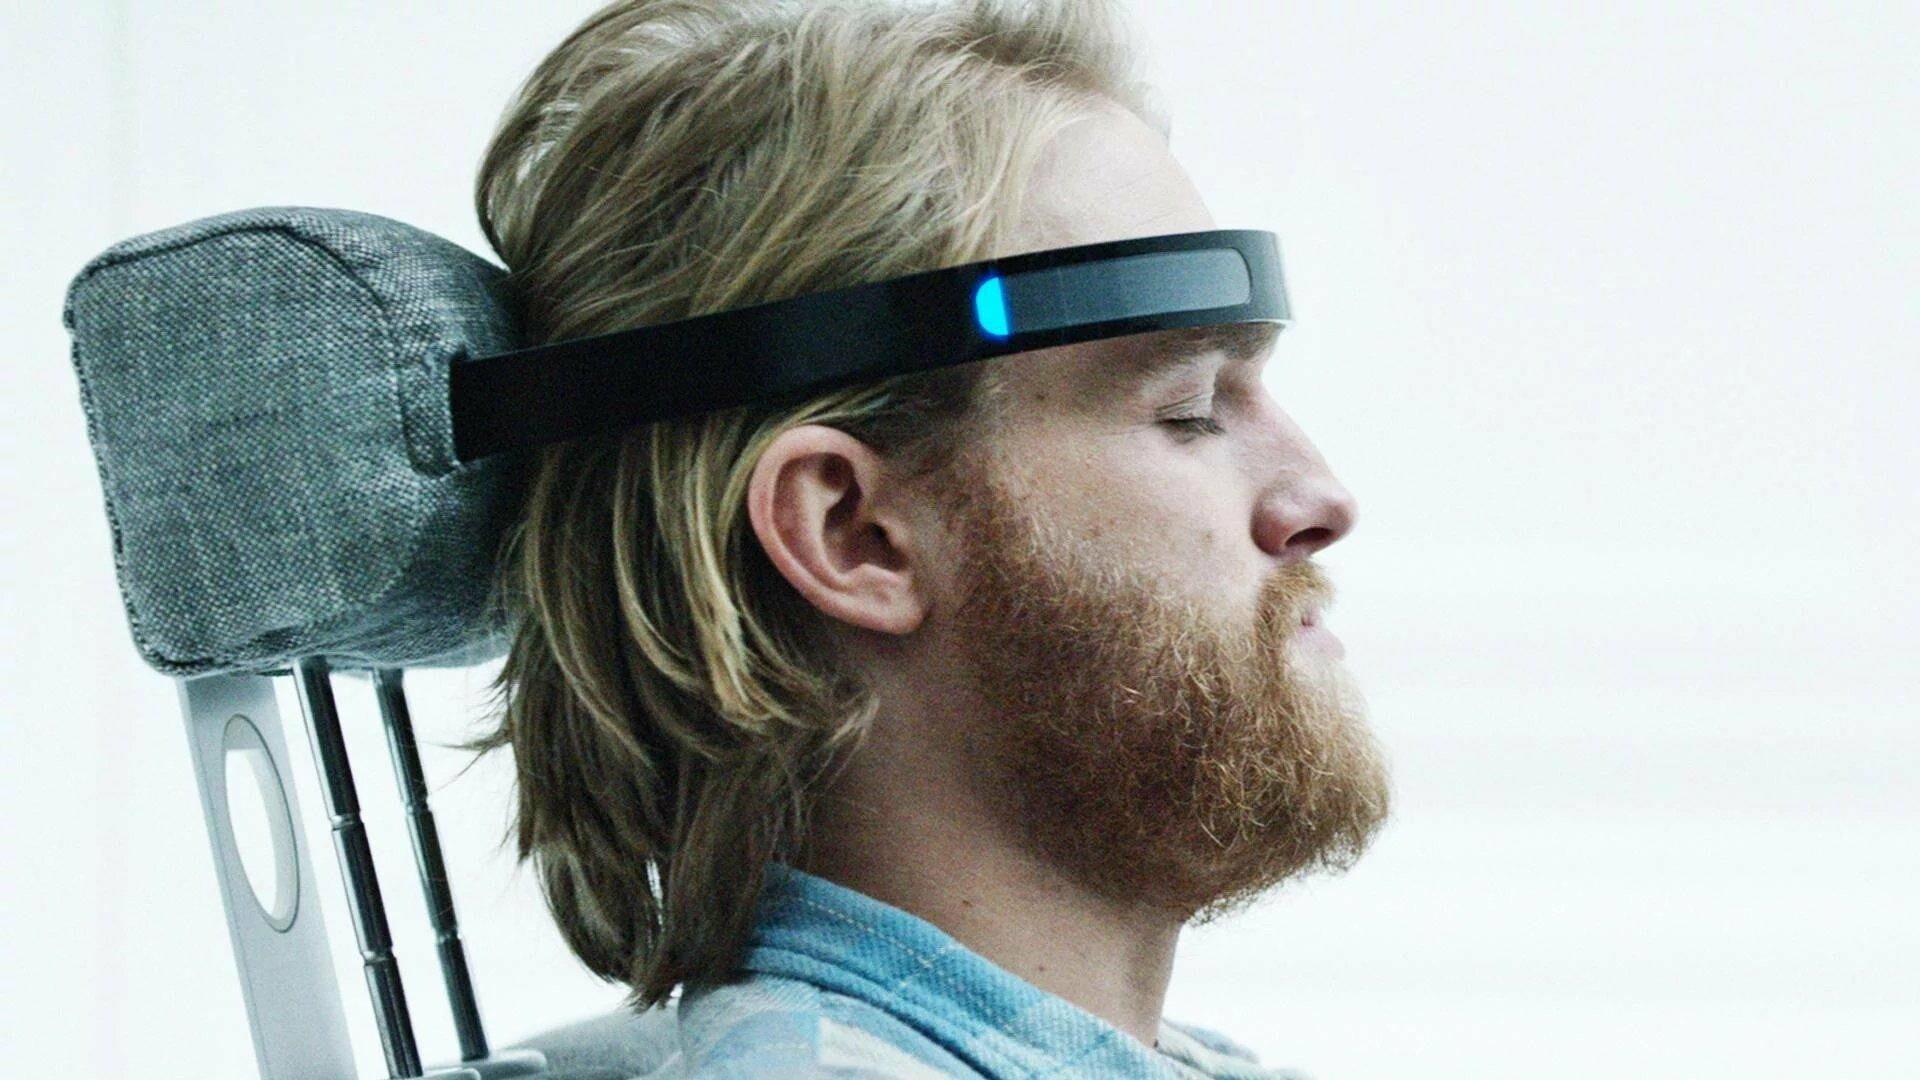 Black Mirror: Playtest, the second episode of the third season, Wyatt Russell as Cooper. 1920x1080 Full HD Wallpaper.